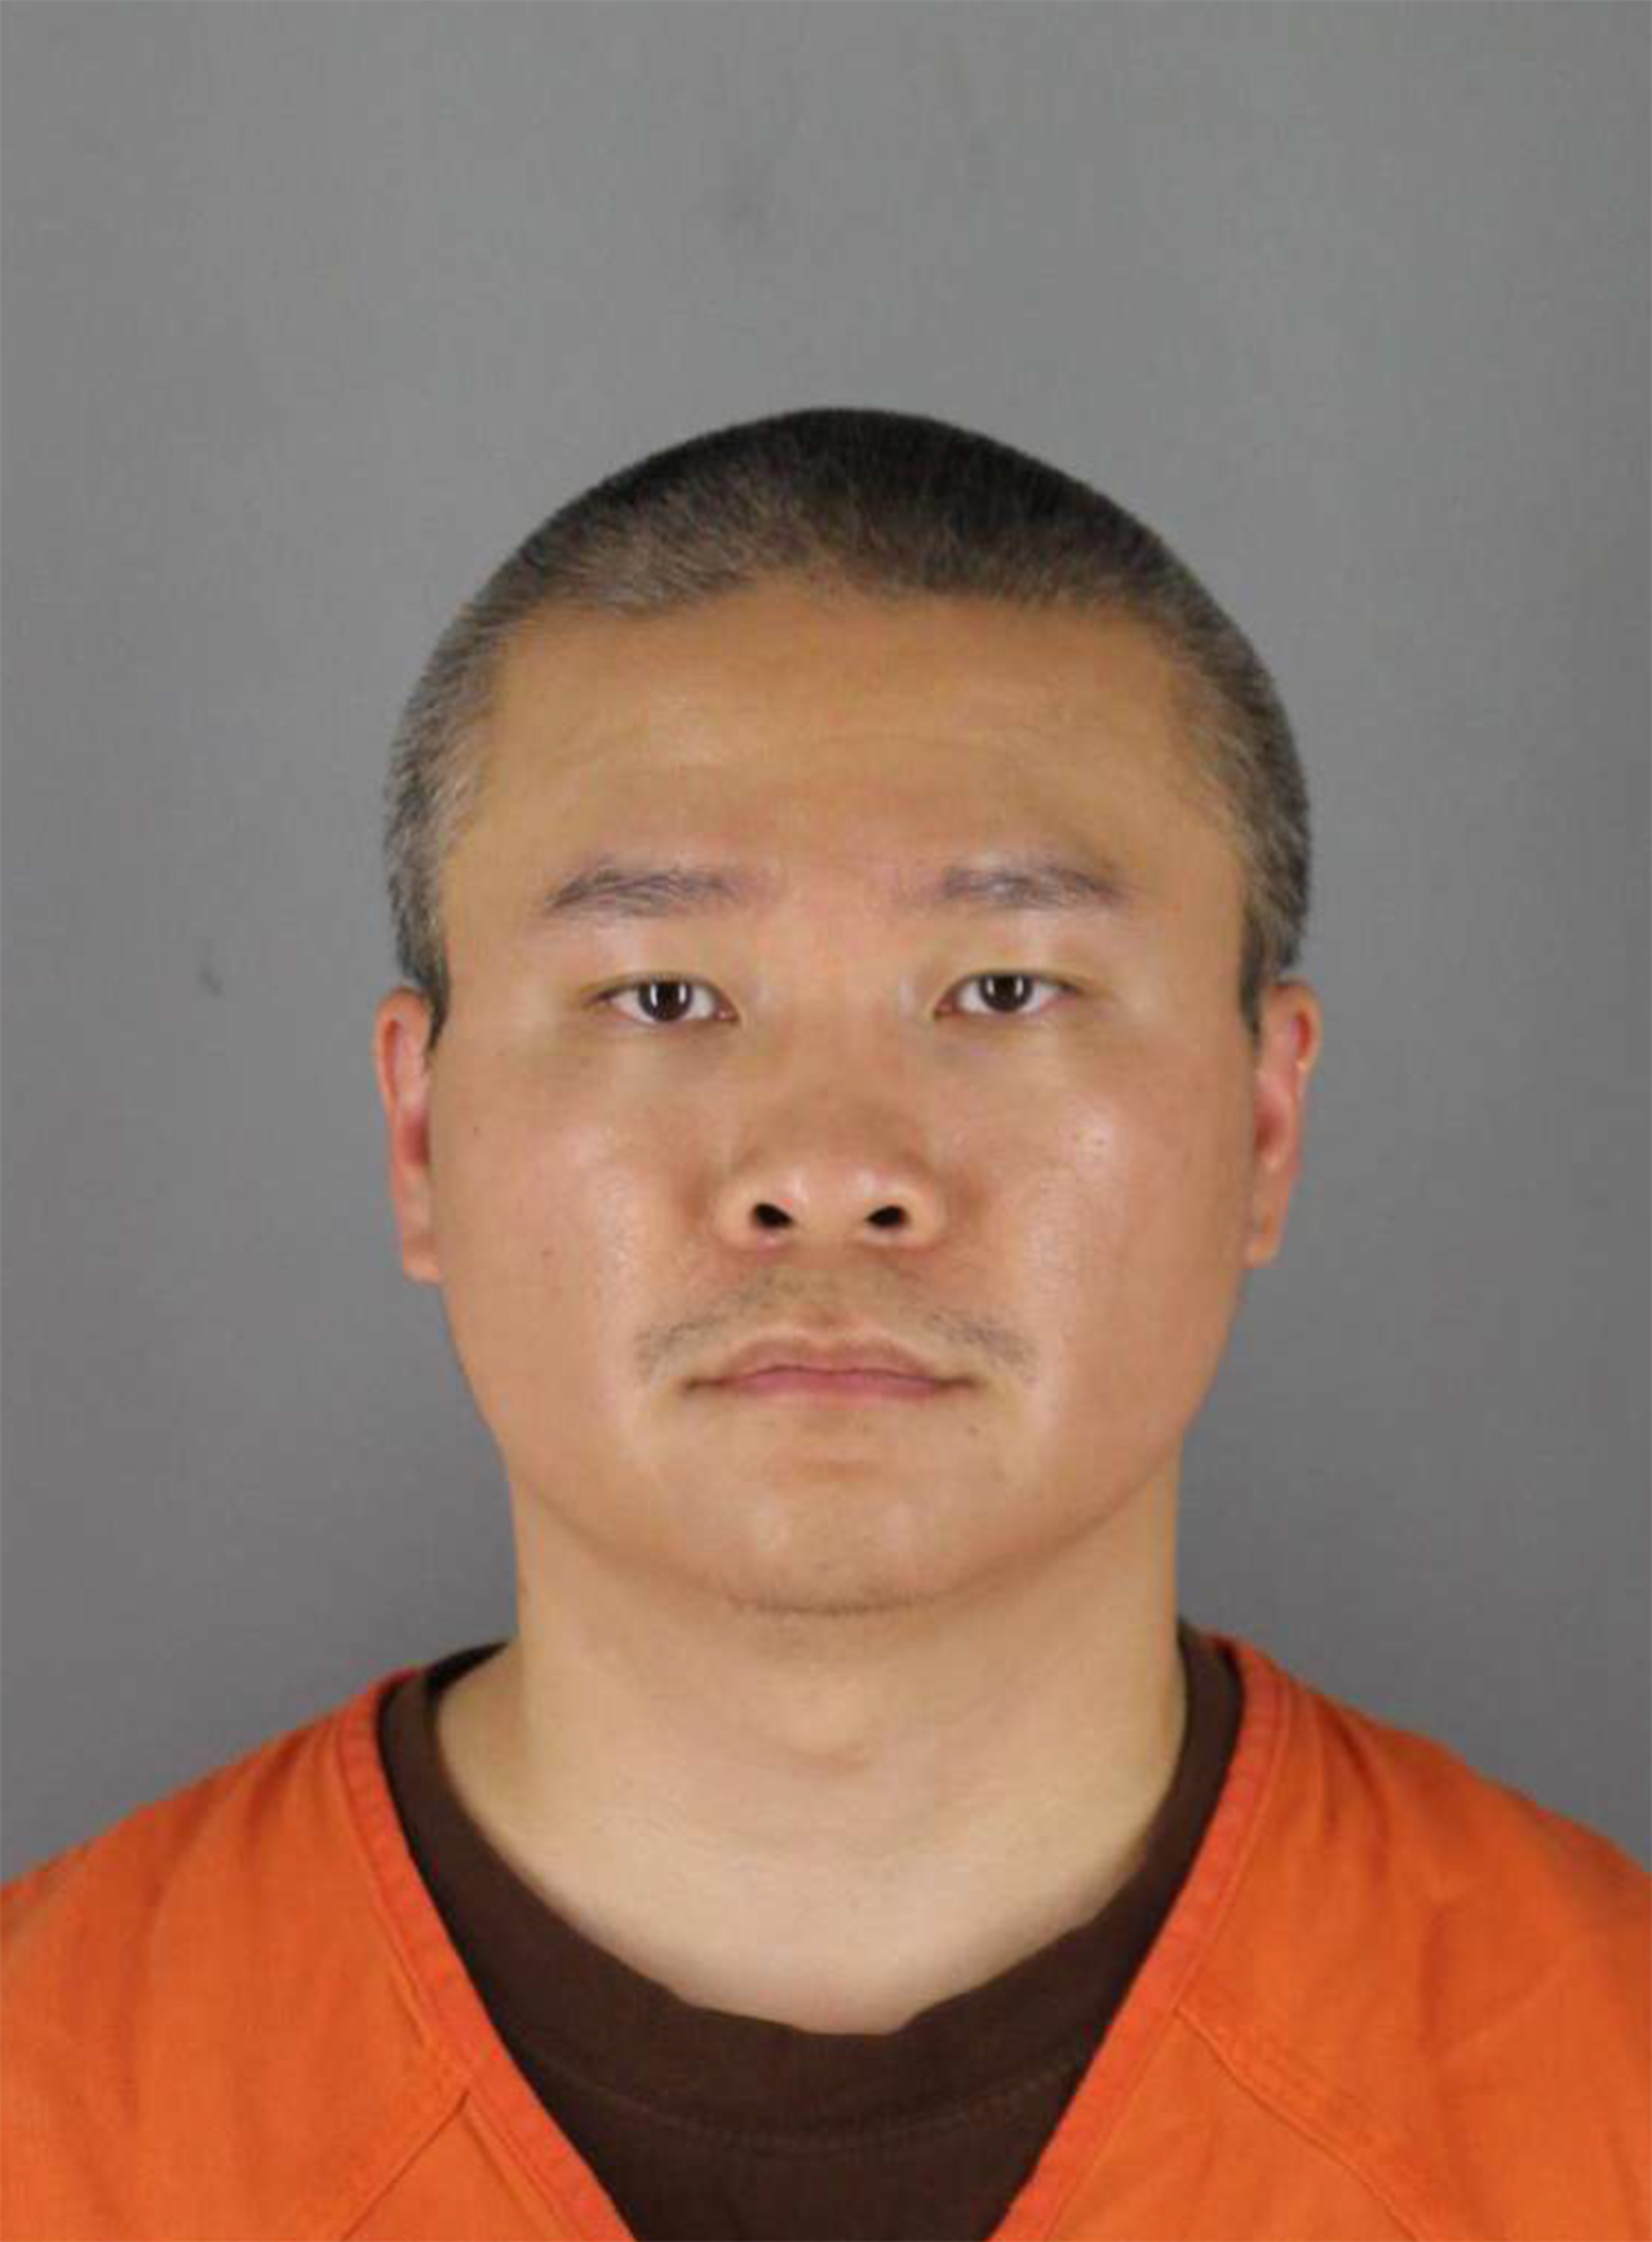 In this handout provided by Hennepin County Sheriff’s Office, former Minneapolis police officer Tou Thao poses for a mugshot after being charged with aiding and abetting second-degree murder in the death of George Floyd. The death sparked riots and protests in cities throughout the country after Floyd, a black man, was killed in police custody in Minneapolis on May 25. (Photo by Hennepin County Sheriff’s Office via Getty Images)